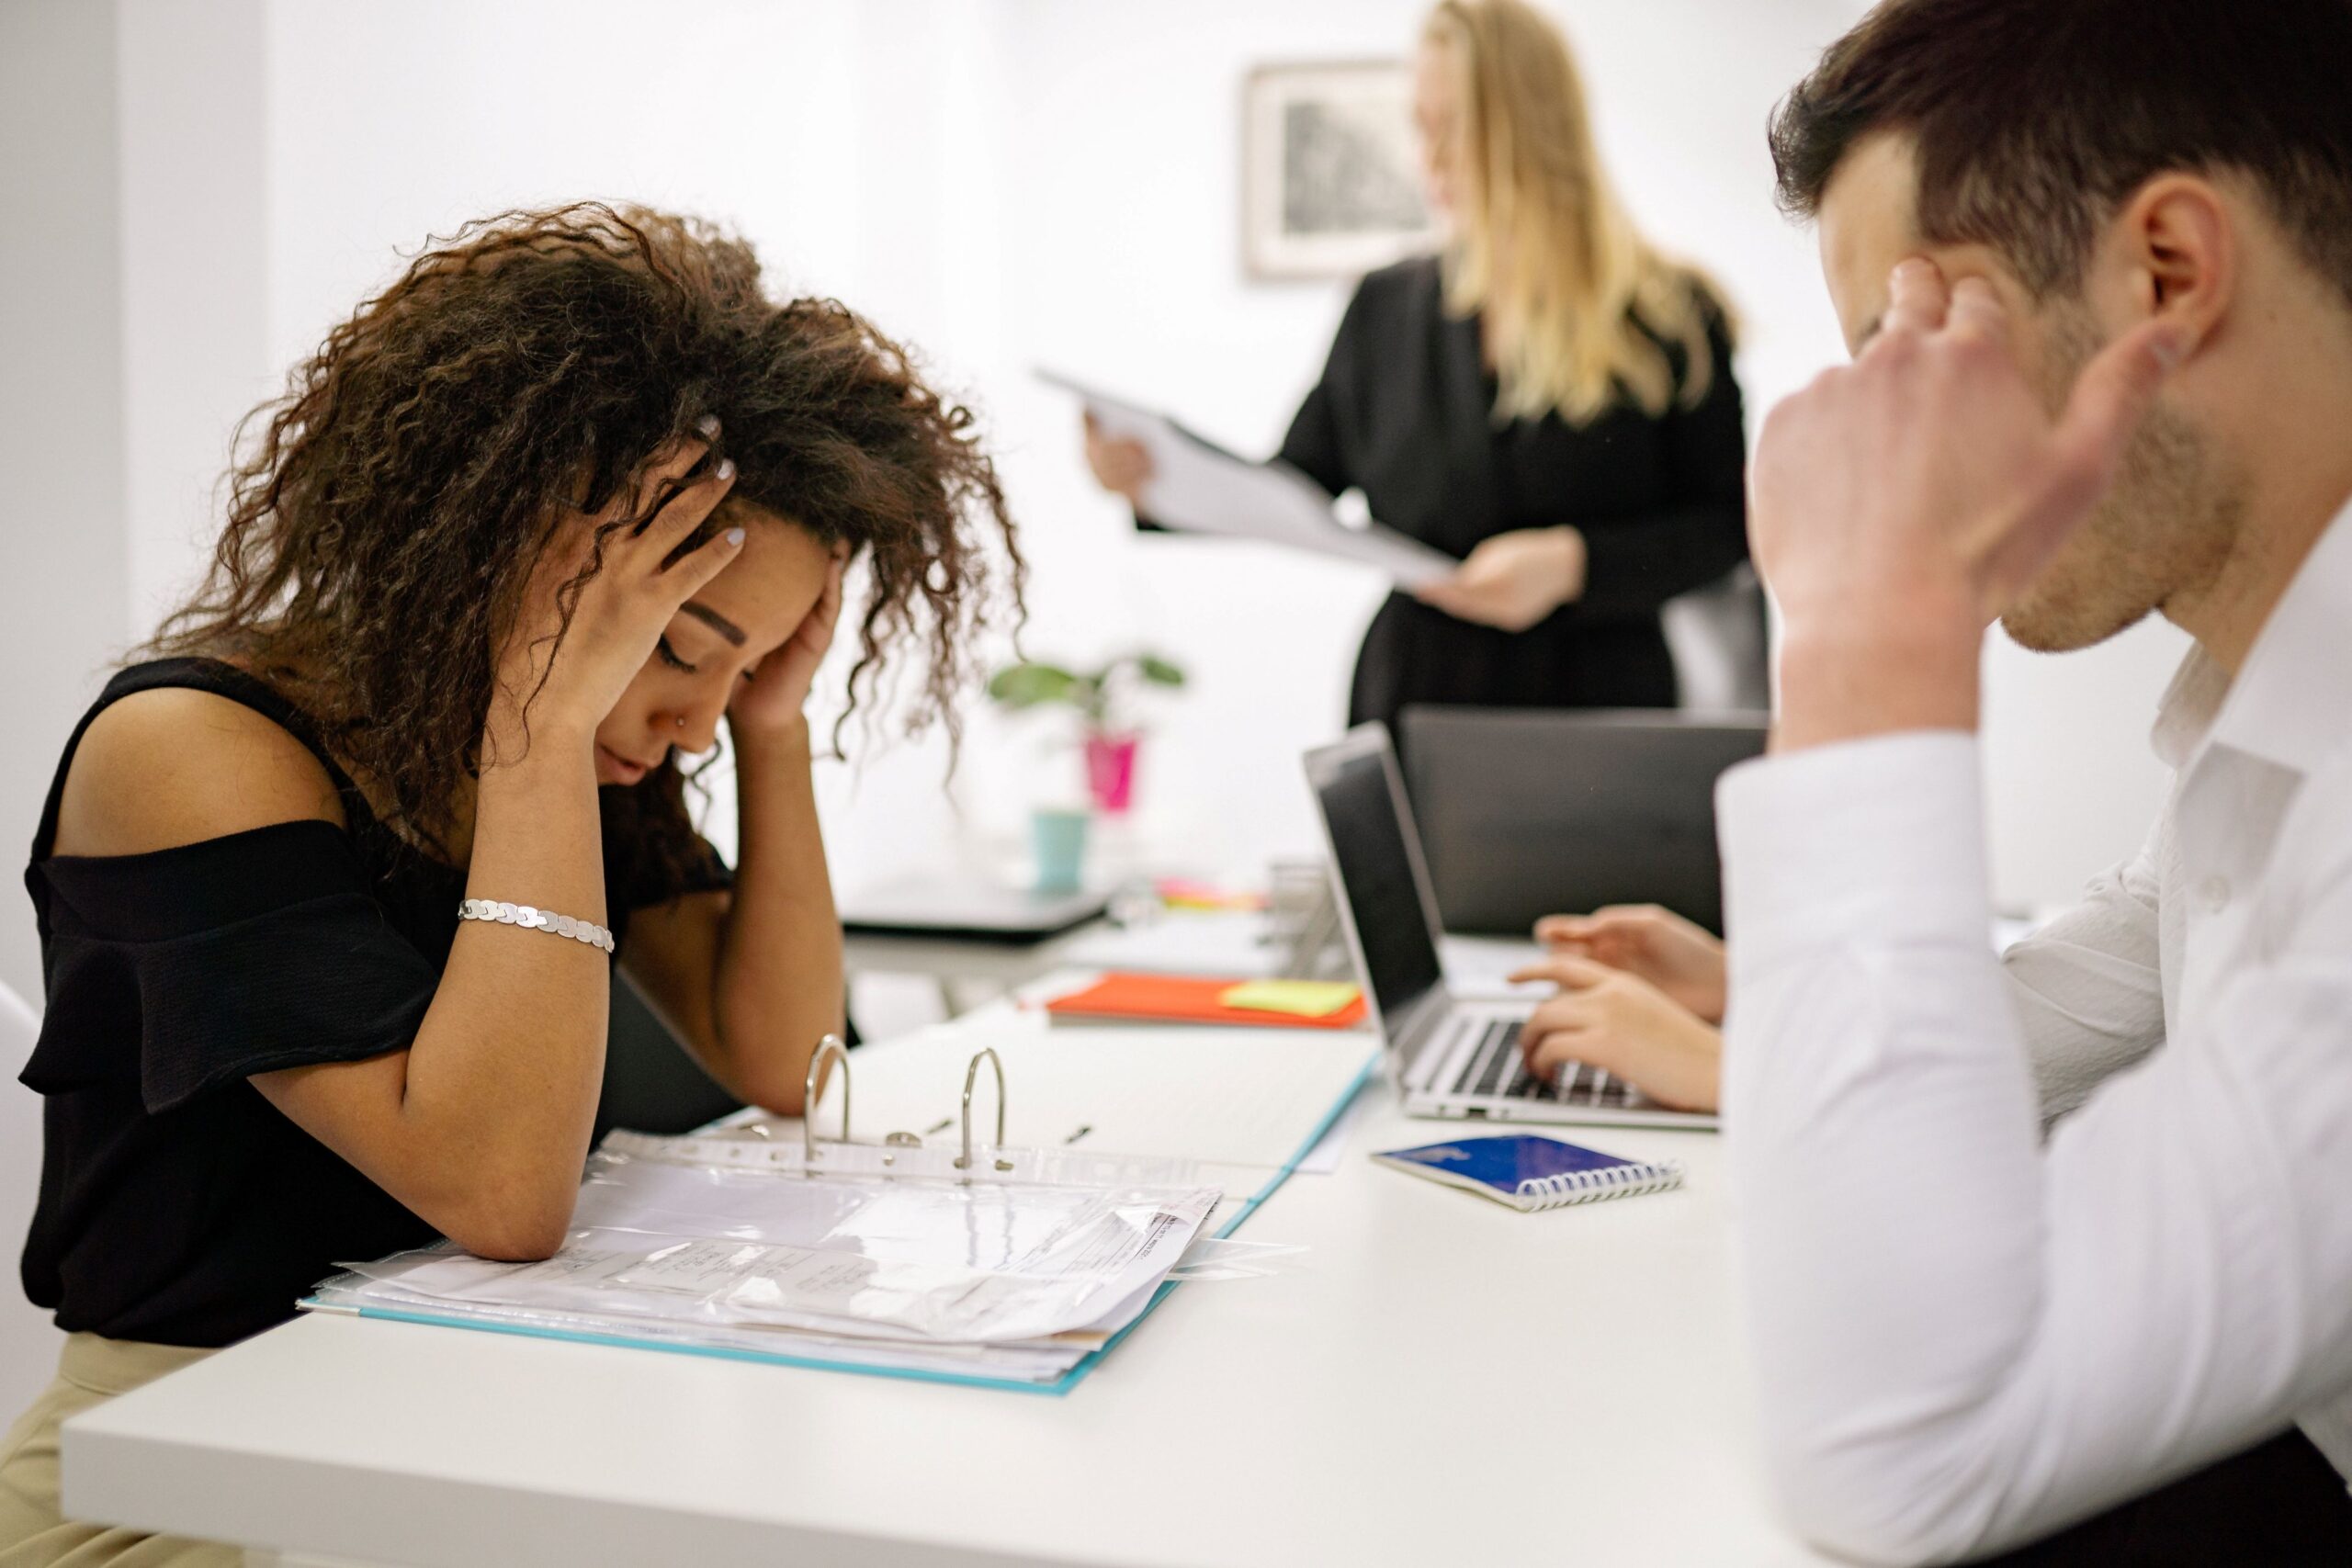 64% of HR professionals admit employee engagement is stagnant or has worsened